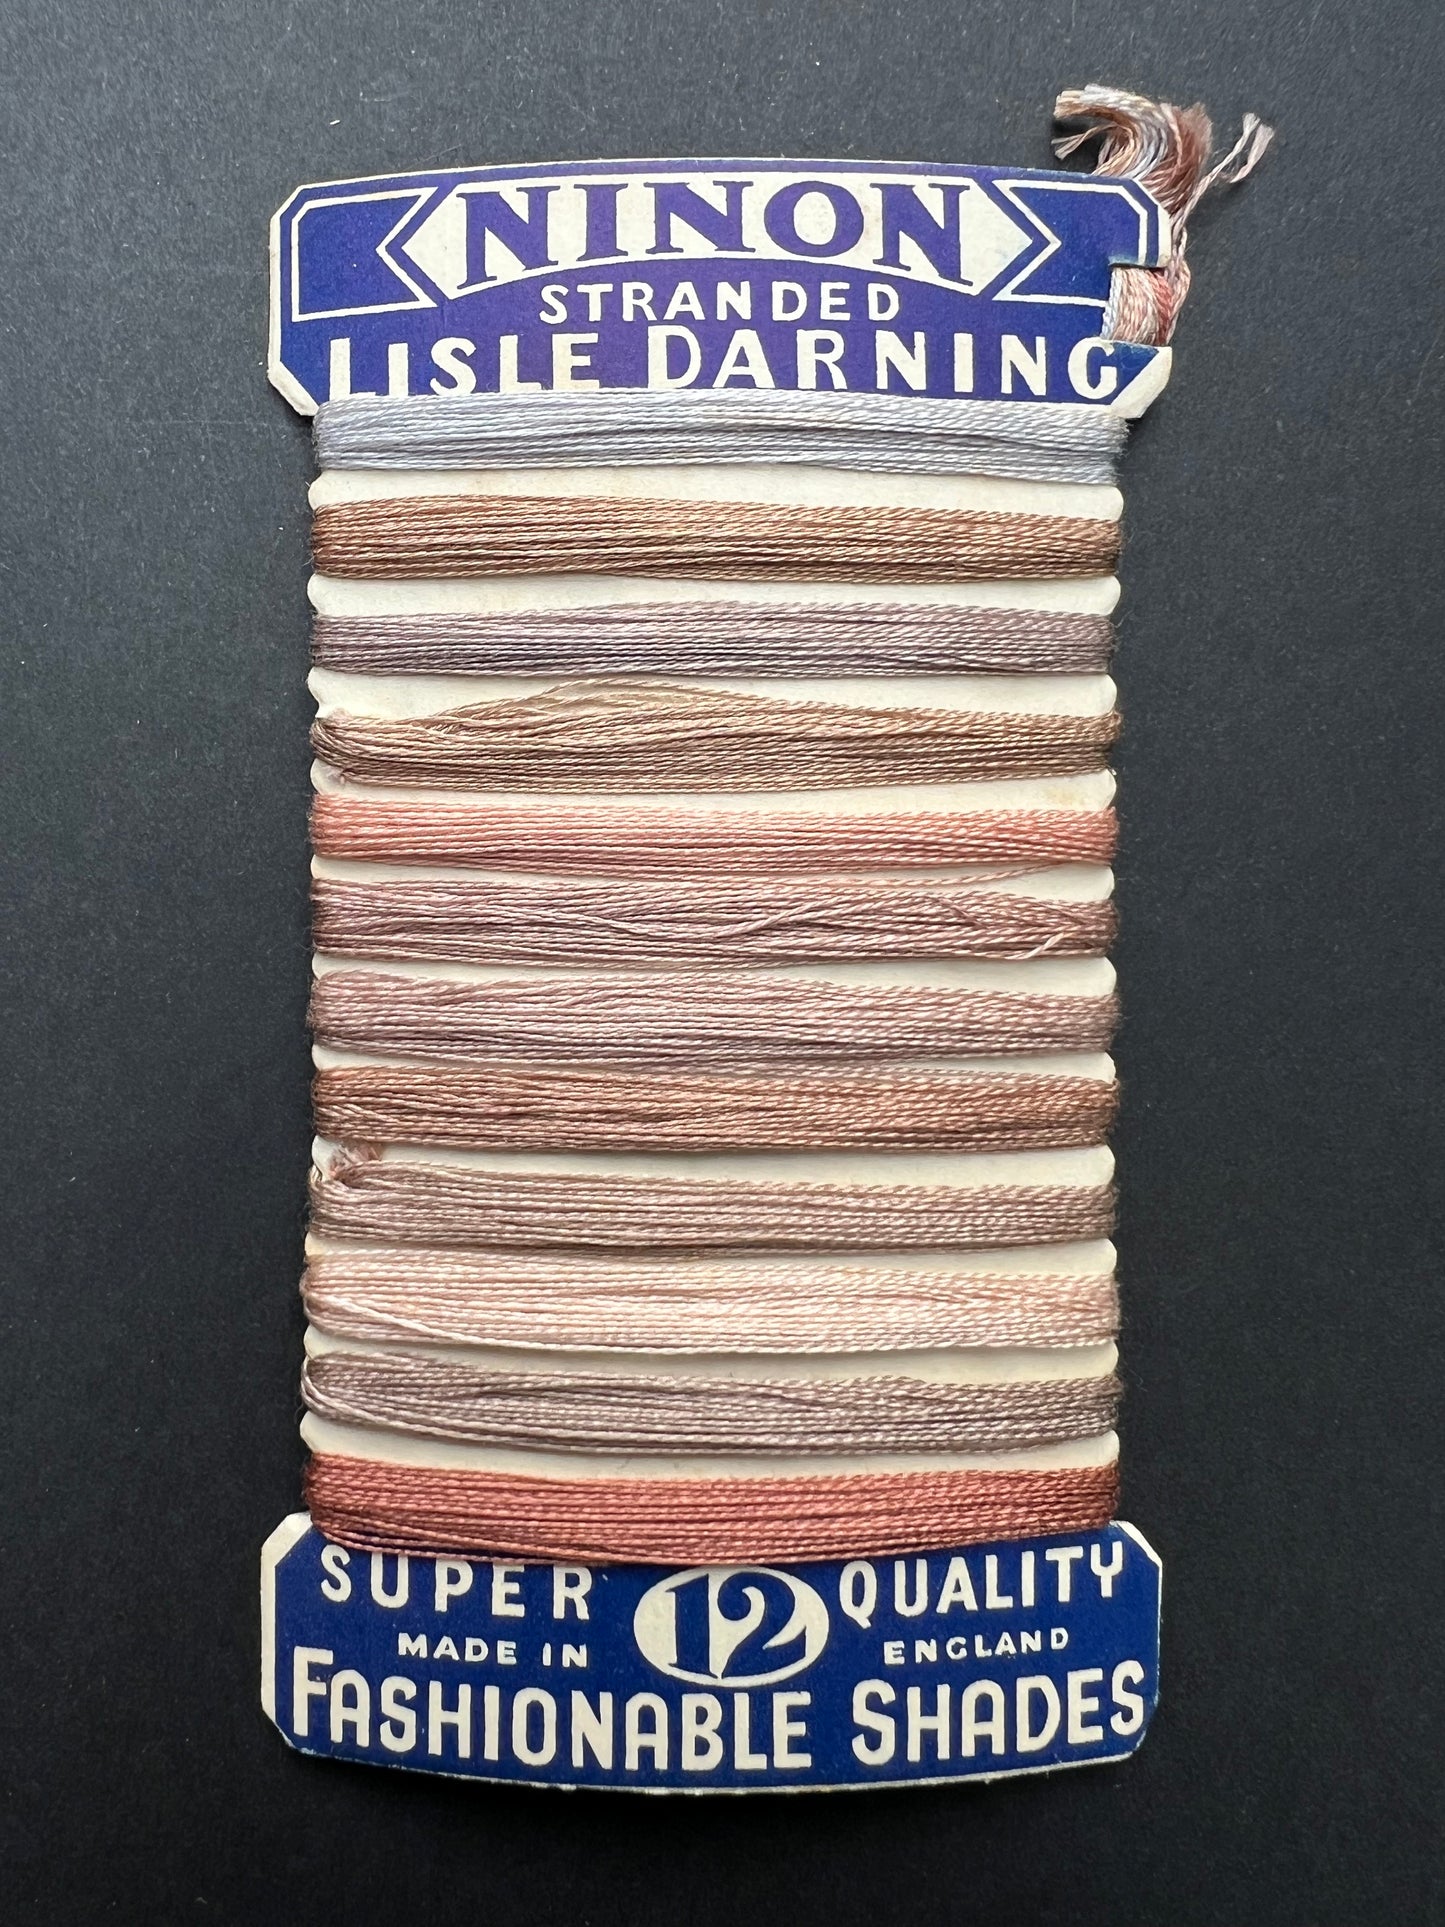 Attractive Vintage Cotton Darning 12 Shades Thread Card - Old Shop Stock